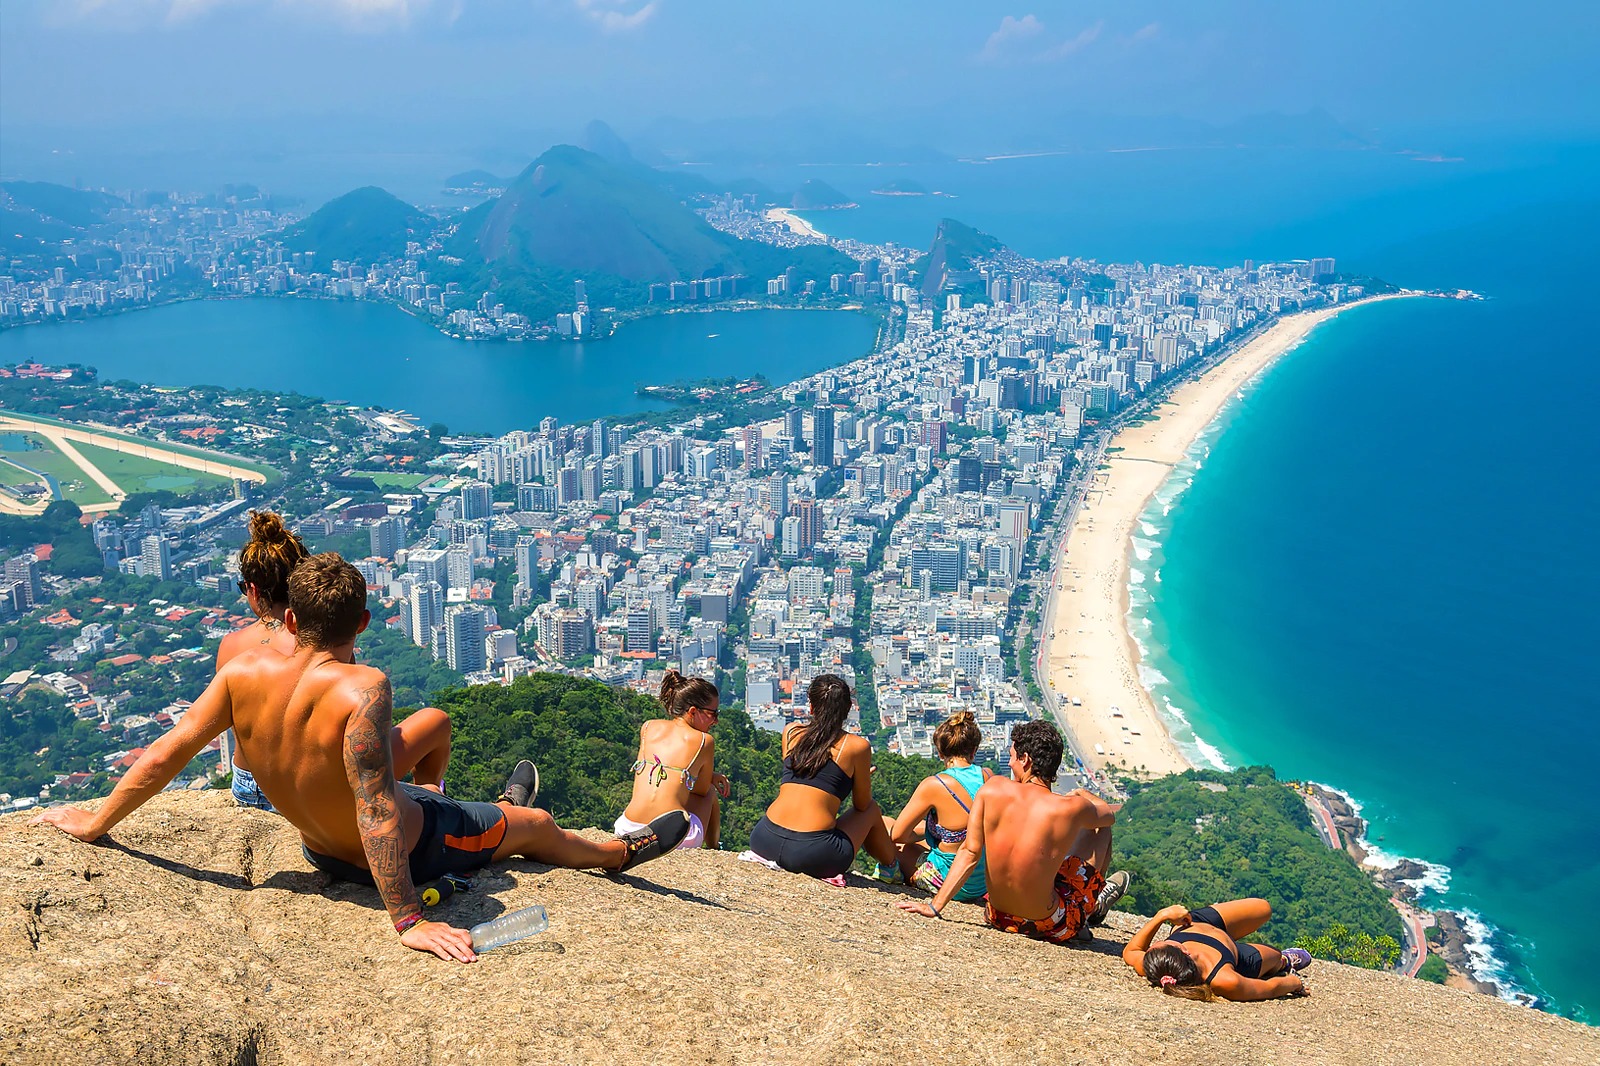 This Biggest, Longest, Tallest Quiz Will Be Extremely Hard for Everyone Except for Geography Experts Rio de Janeiro, Brazil